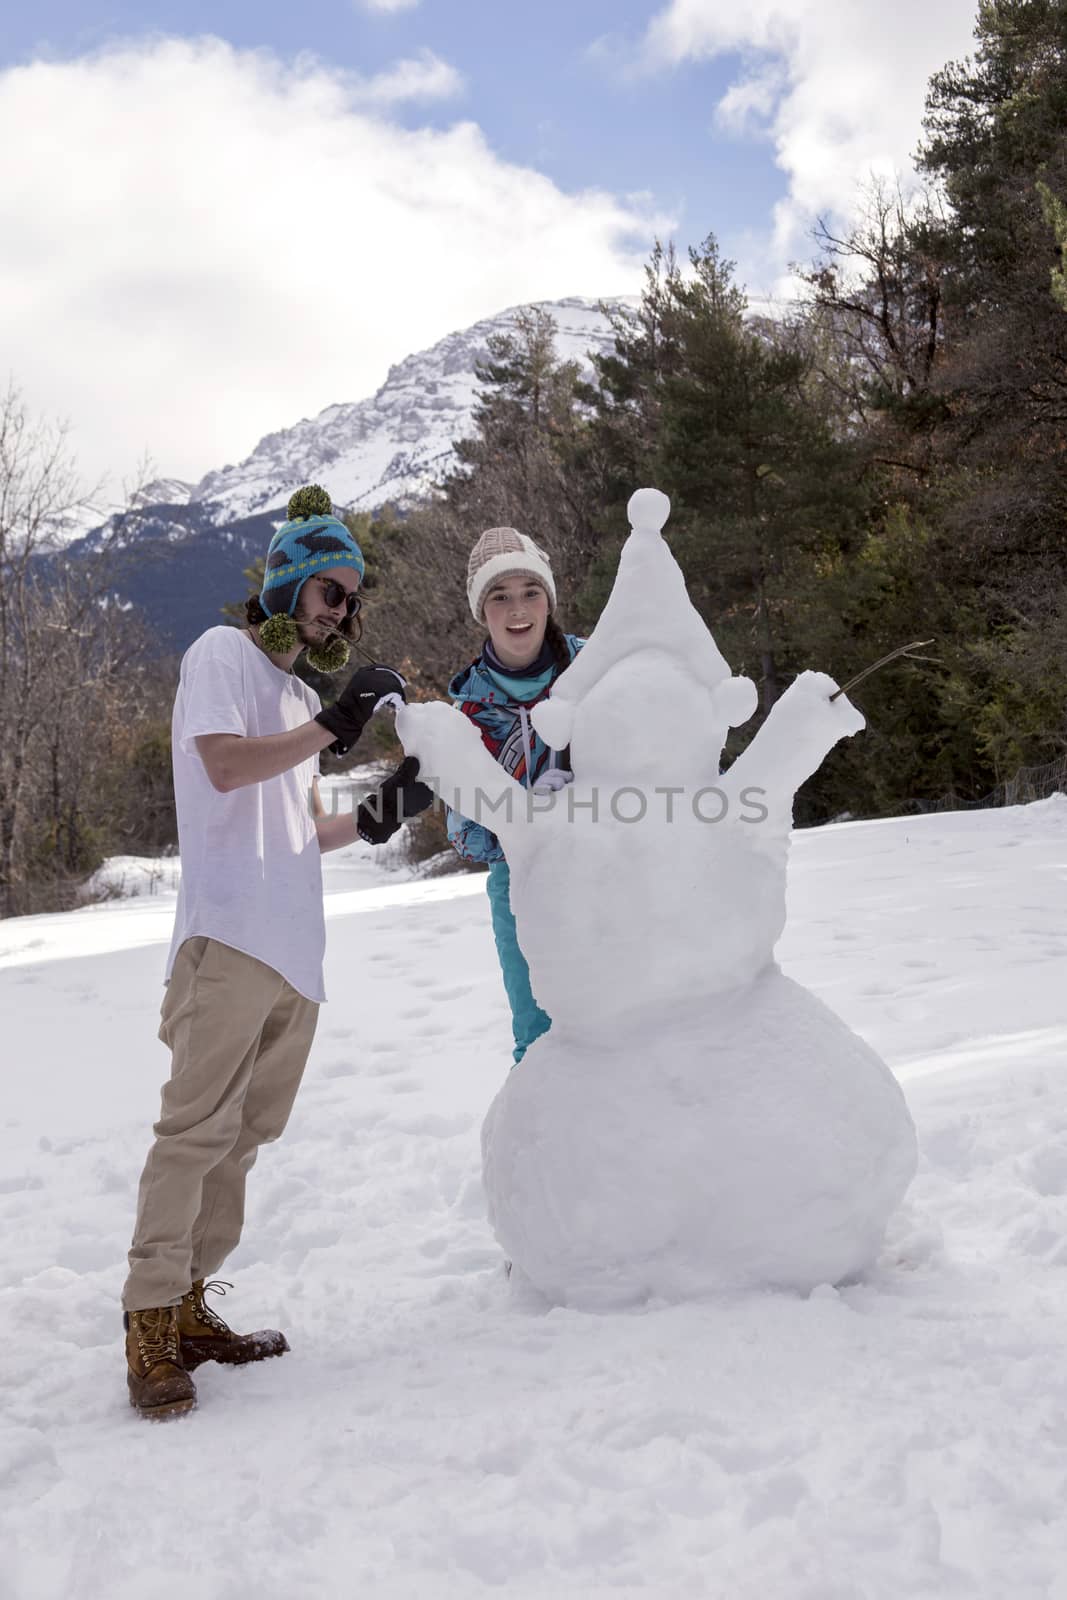 Young boy and girl make a snowman on a sunny day in the winter snow-covered forest in the mountains.